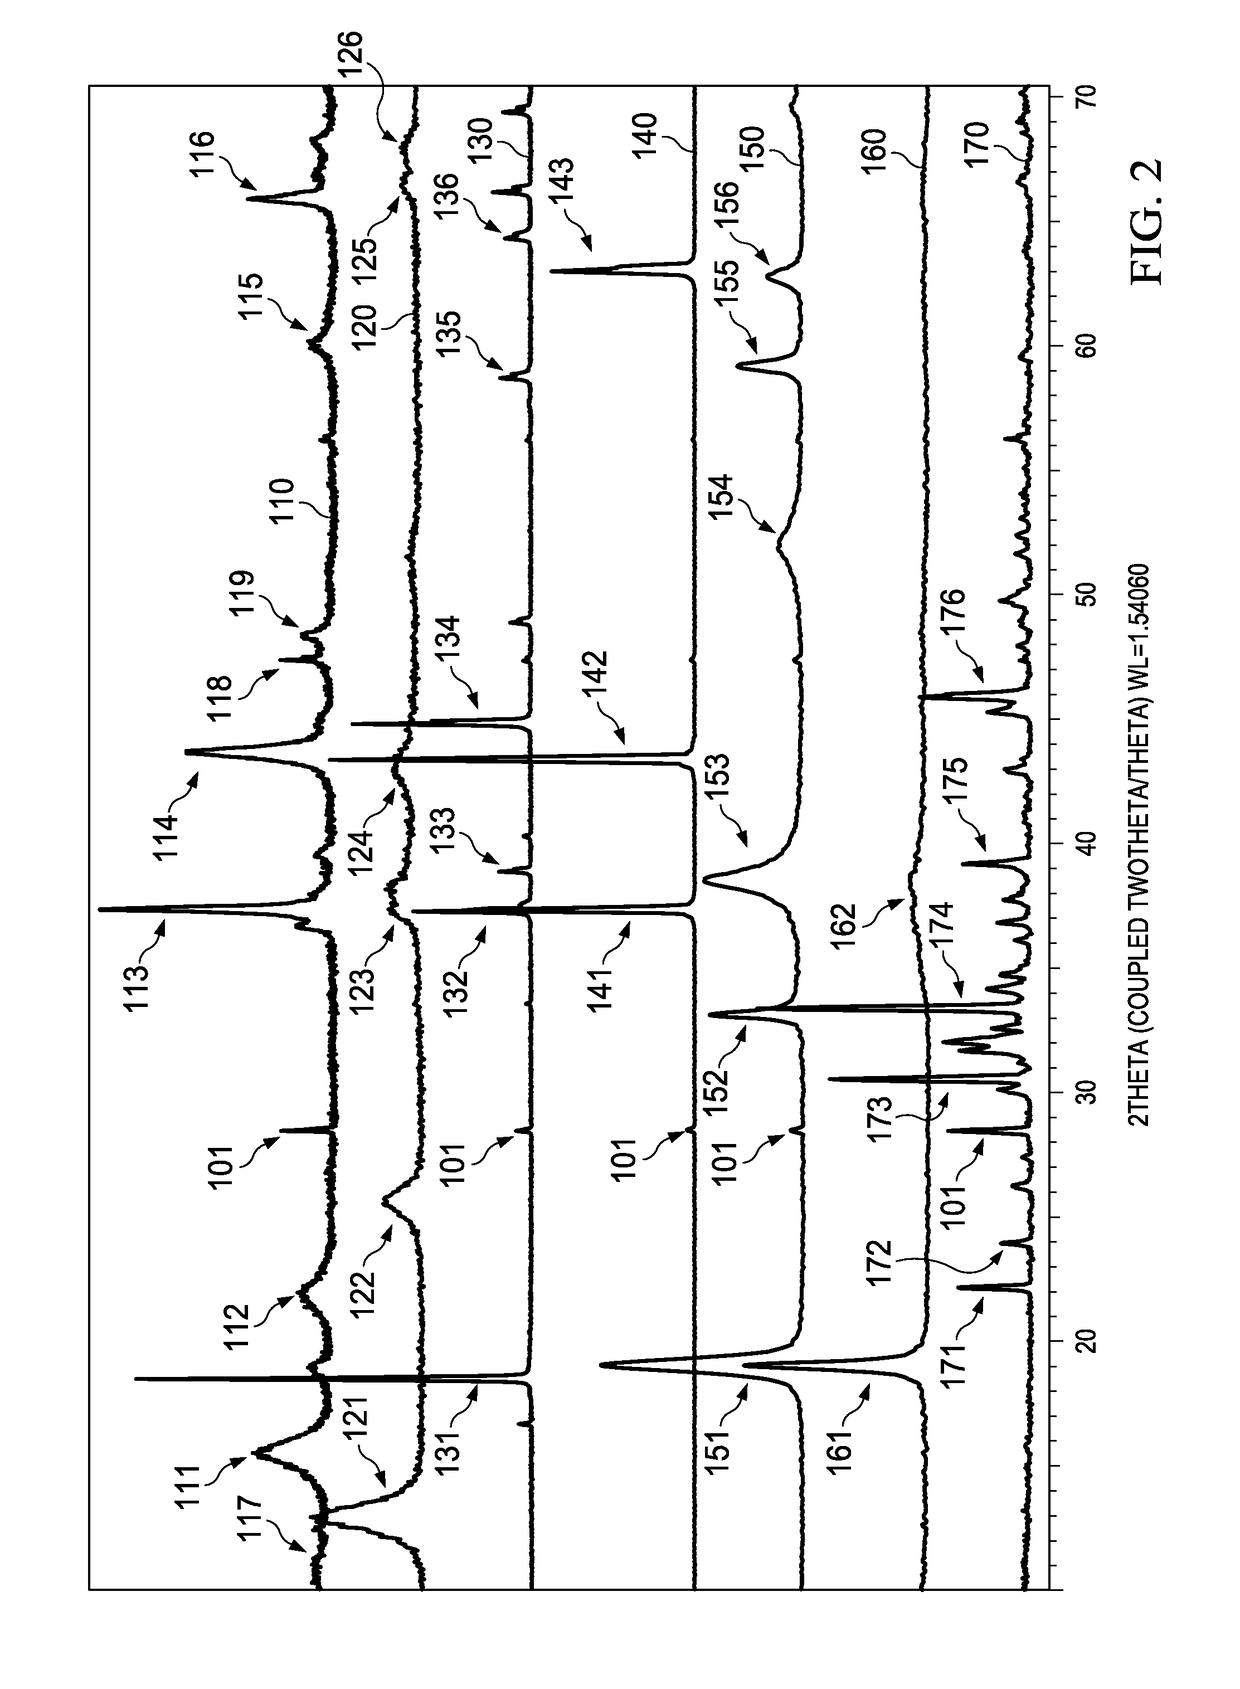 Battery including beta-delithiated layered nickel oxide electrochemically active cathode material